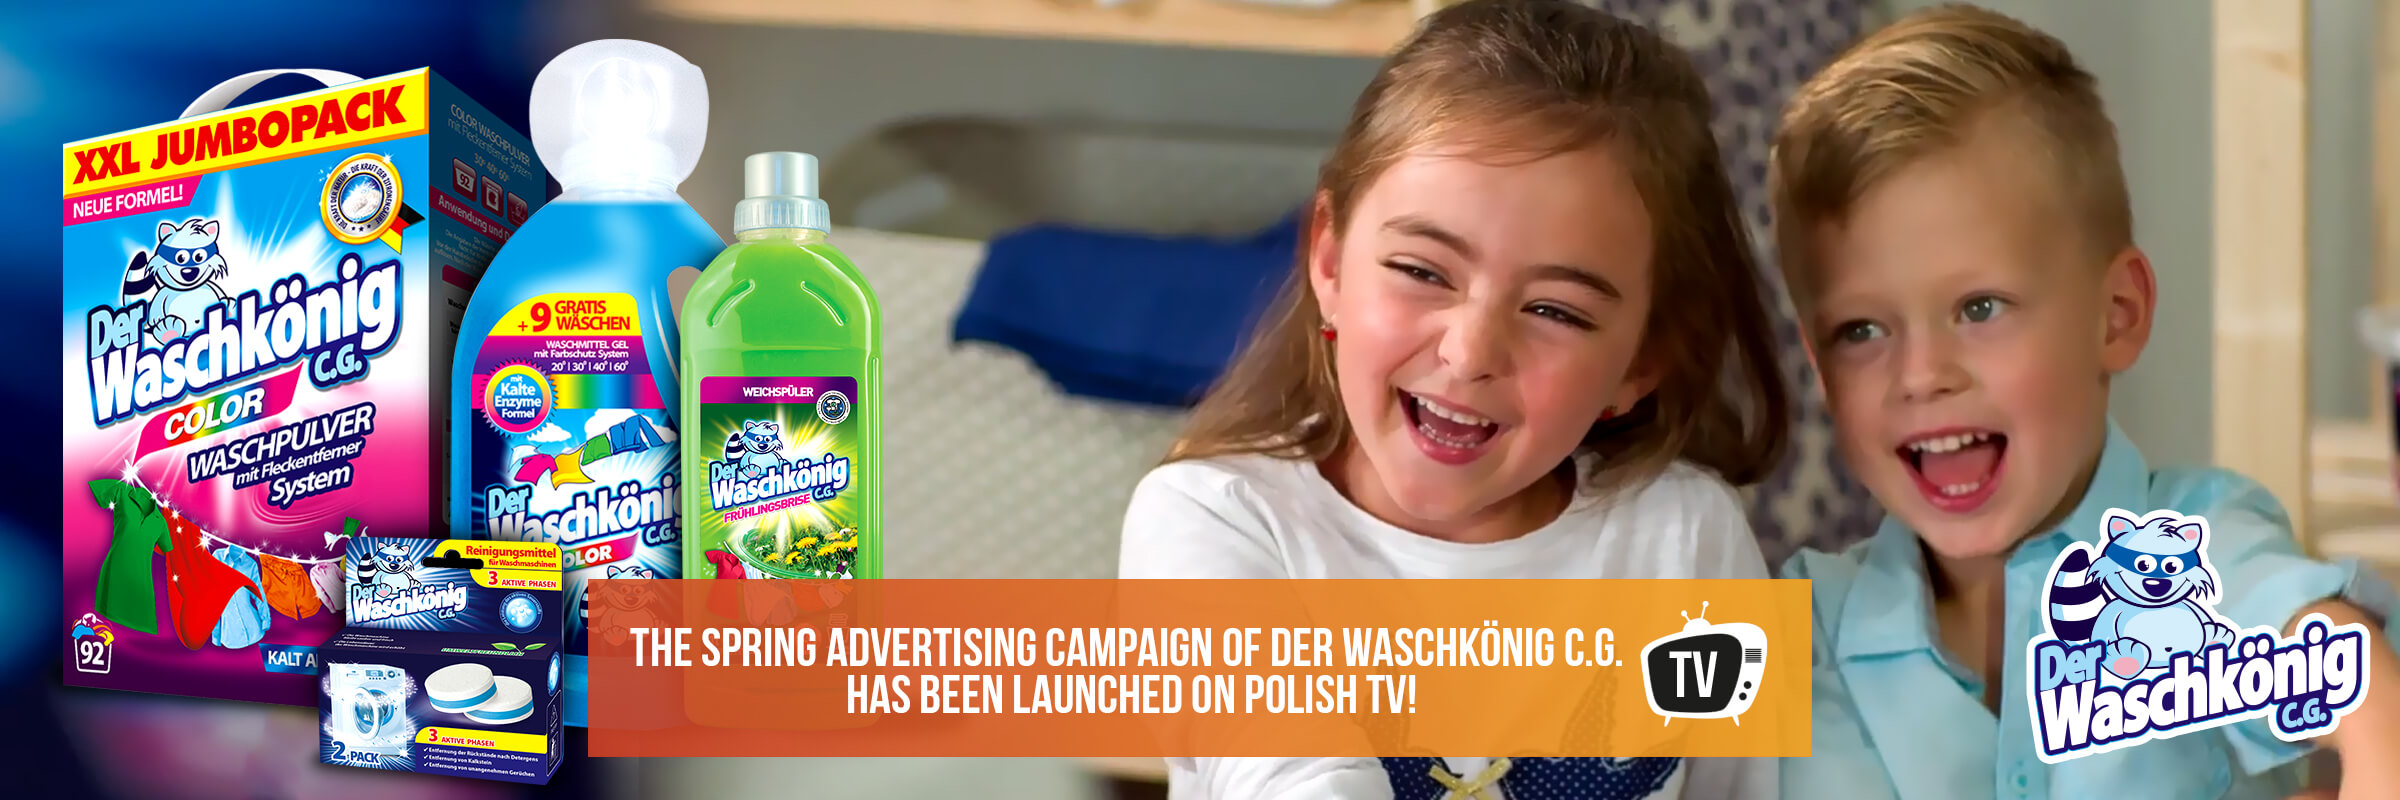 The spring advertising campaign of Der Waschkönig has been launched on Polish TV!